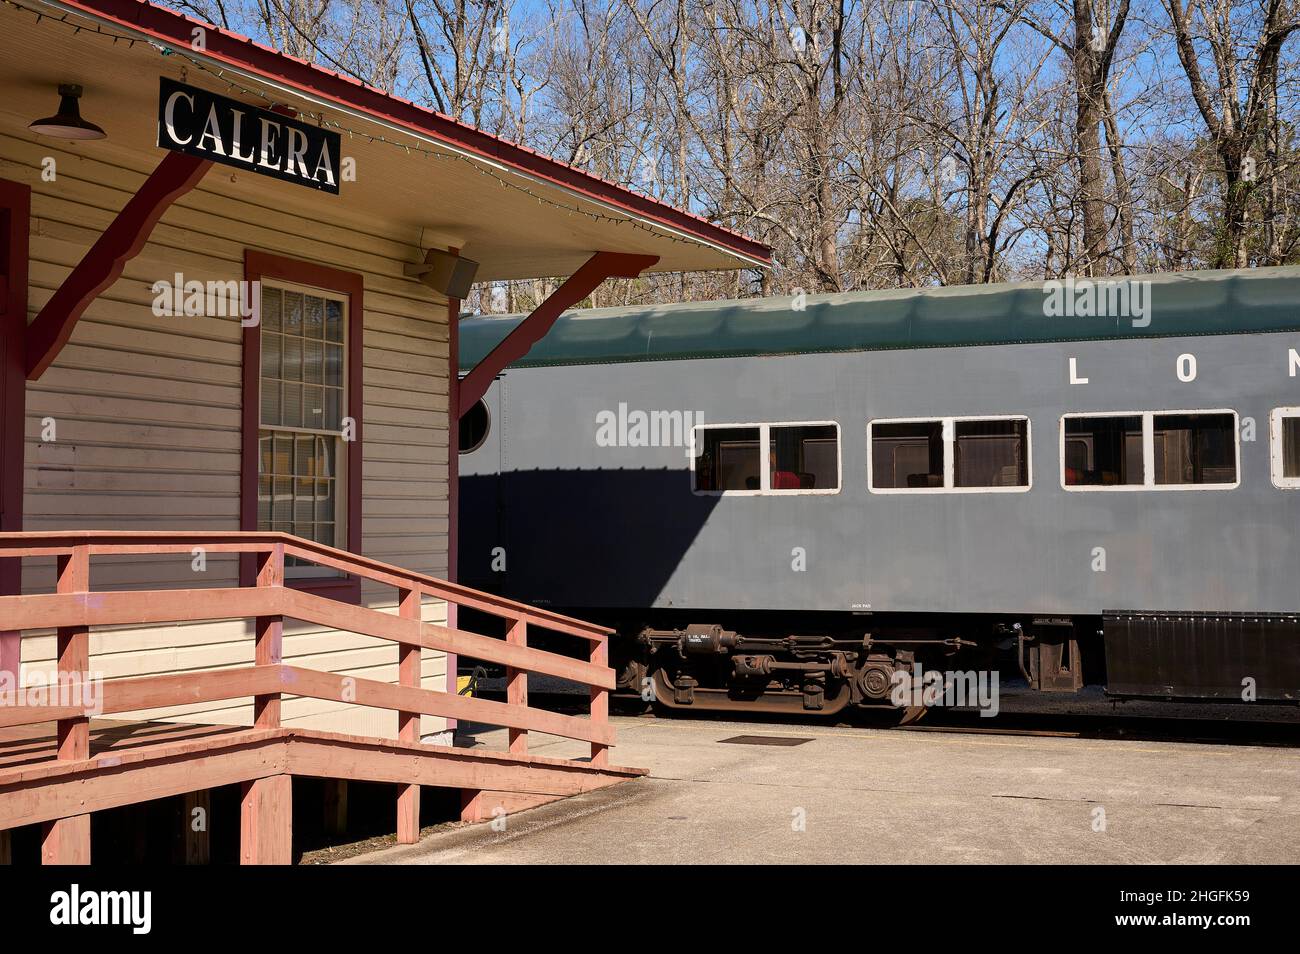 Heart of Dixie Railroad Museum train station on display including a pullman car in Calera Alabama, USA. Stock Photo